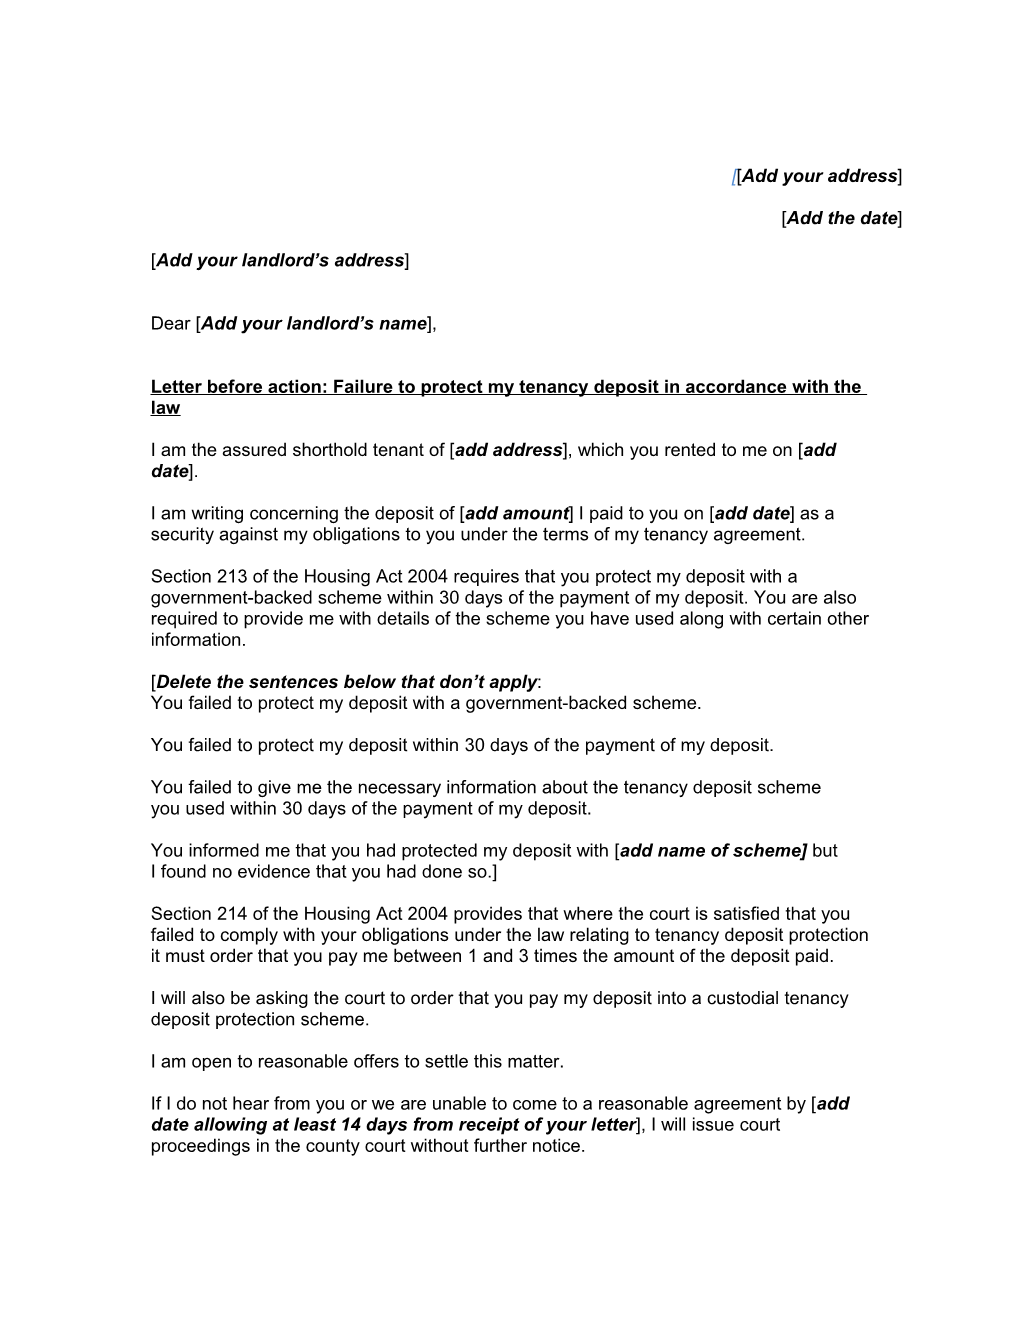 Letter Before Action: Failure to Protect My Tenancy Deposit in Accordance with the Law